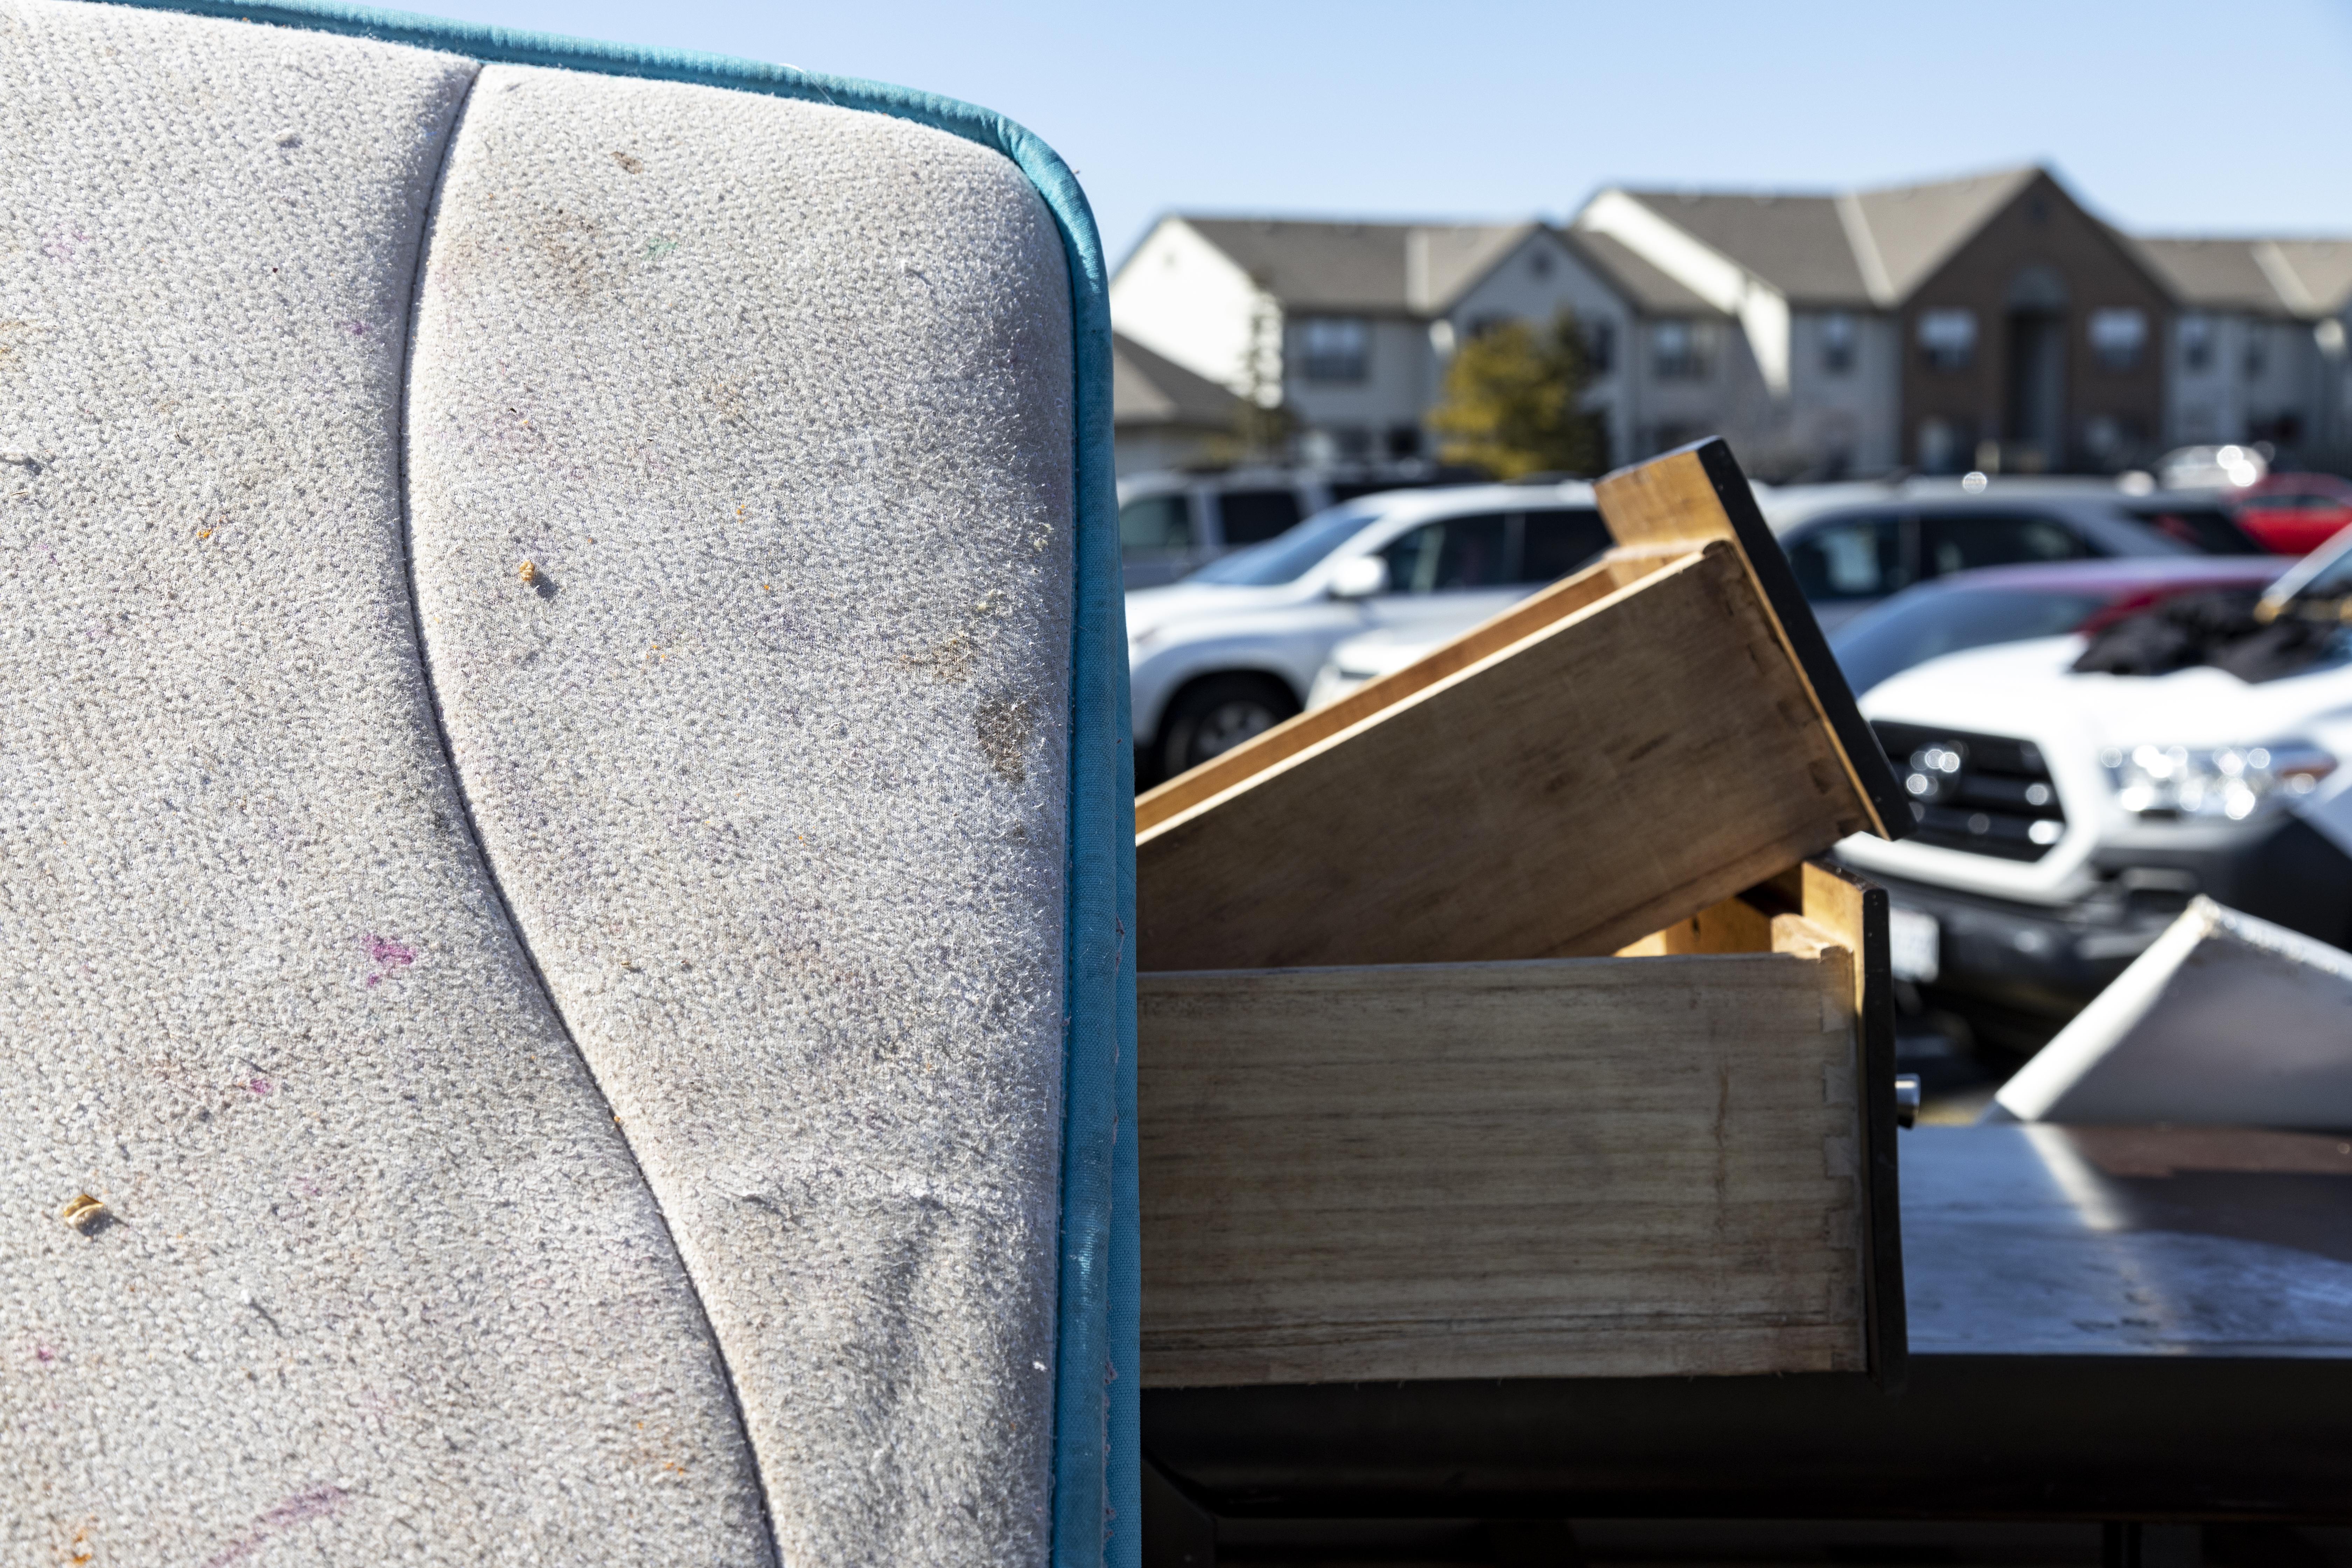 A mattress and drawers outside a residence in the unincorporated community of Galloway on March 3